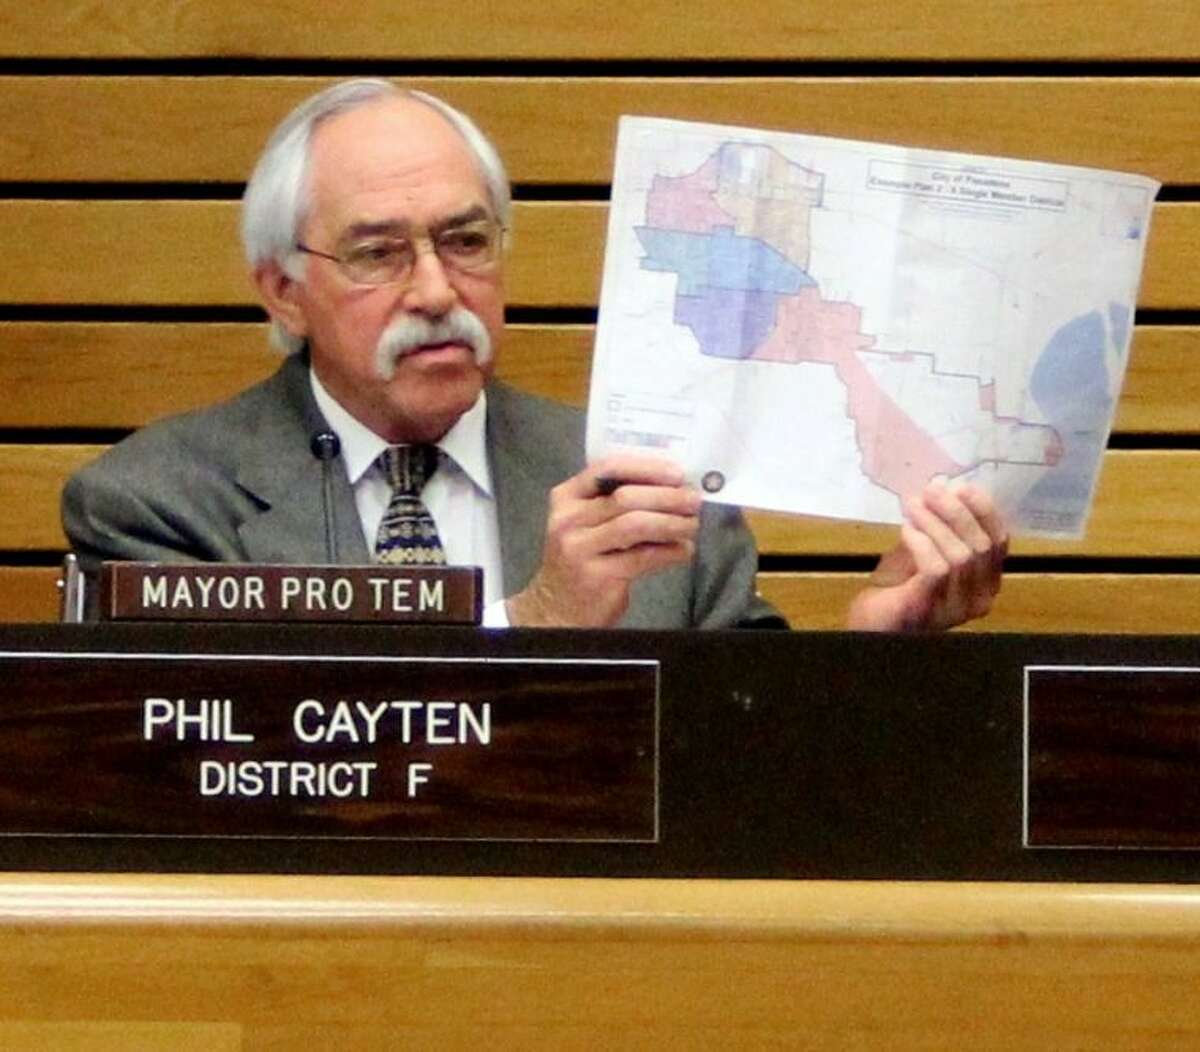 Pasadena City Councilmember Phil Cayten held up the new city district map during the meeting and voiced his support. "I’m going to stand by these numbers. If anyone needs to look at these numbers, we have the information. Call the City Secretary and look at the maps yourself."